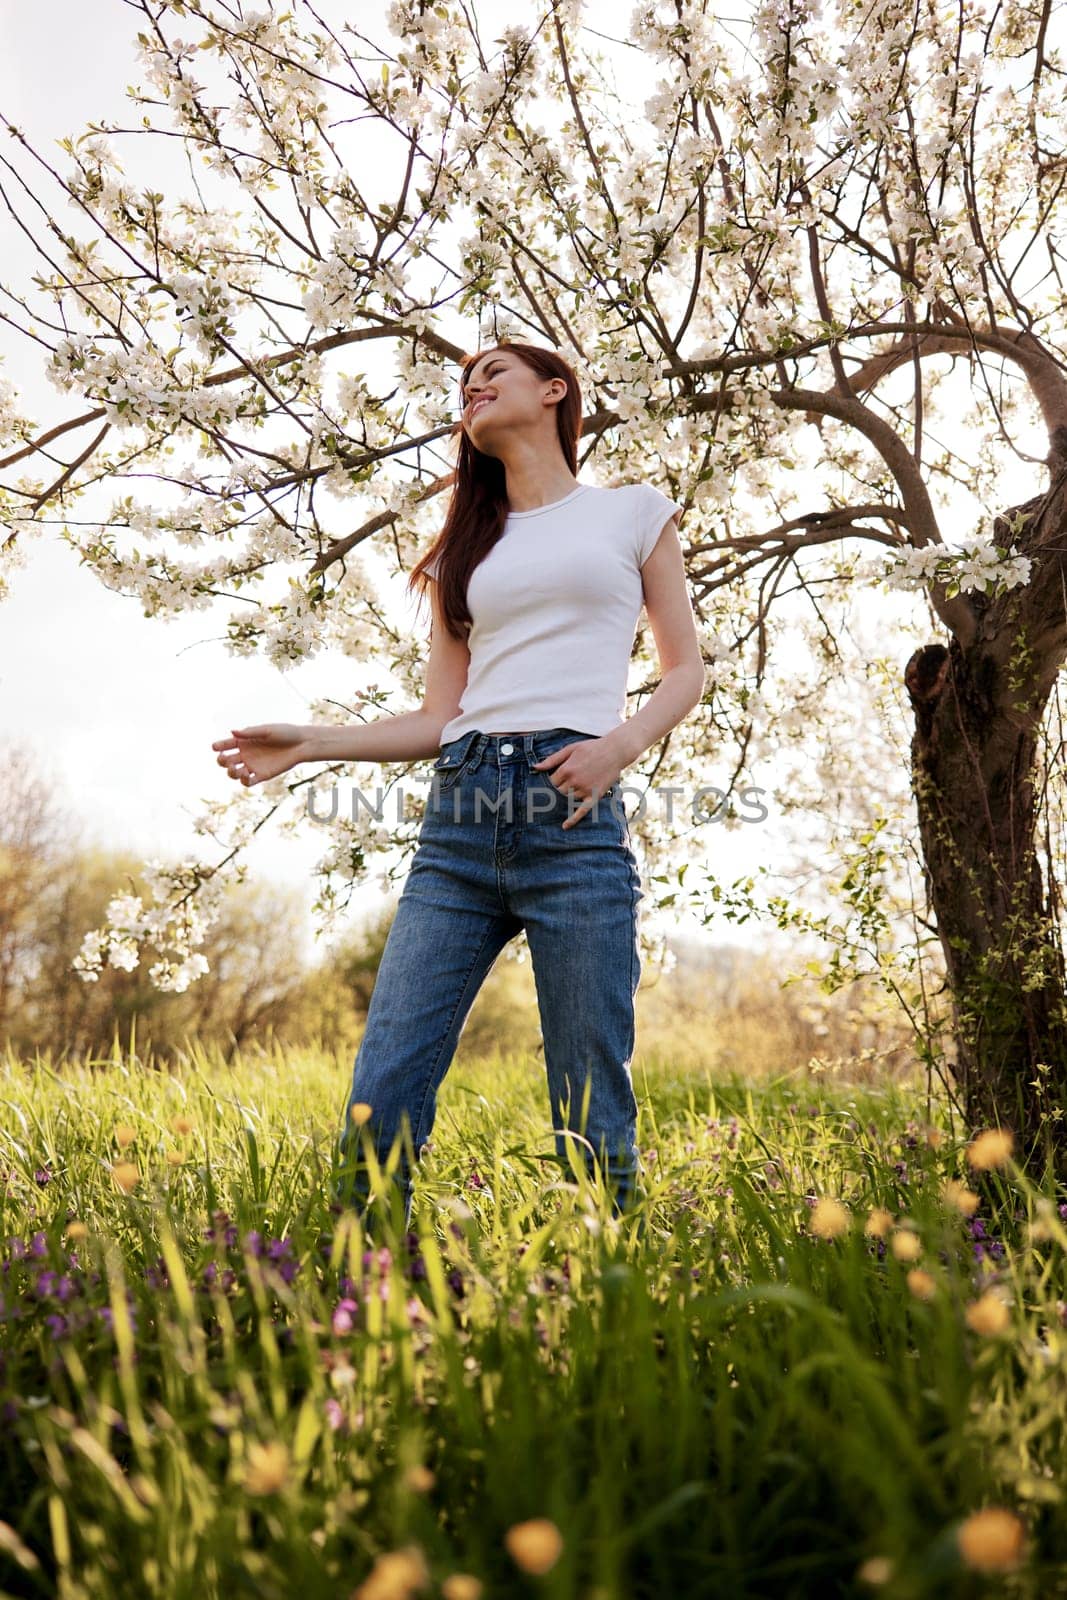 joyful, happy woman in jeans and a light T-shirt posing against the backdrop of a flowering tree. High quality photo